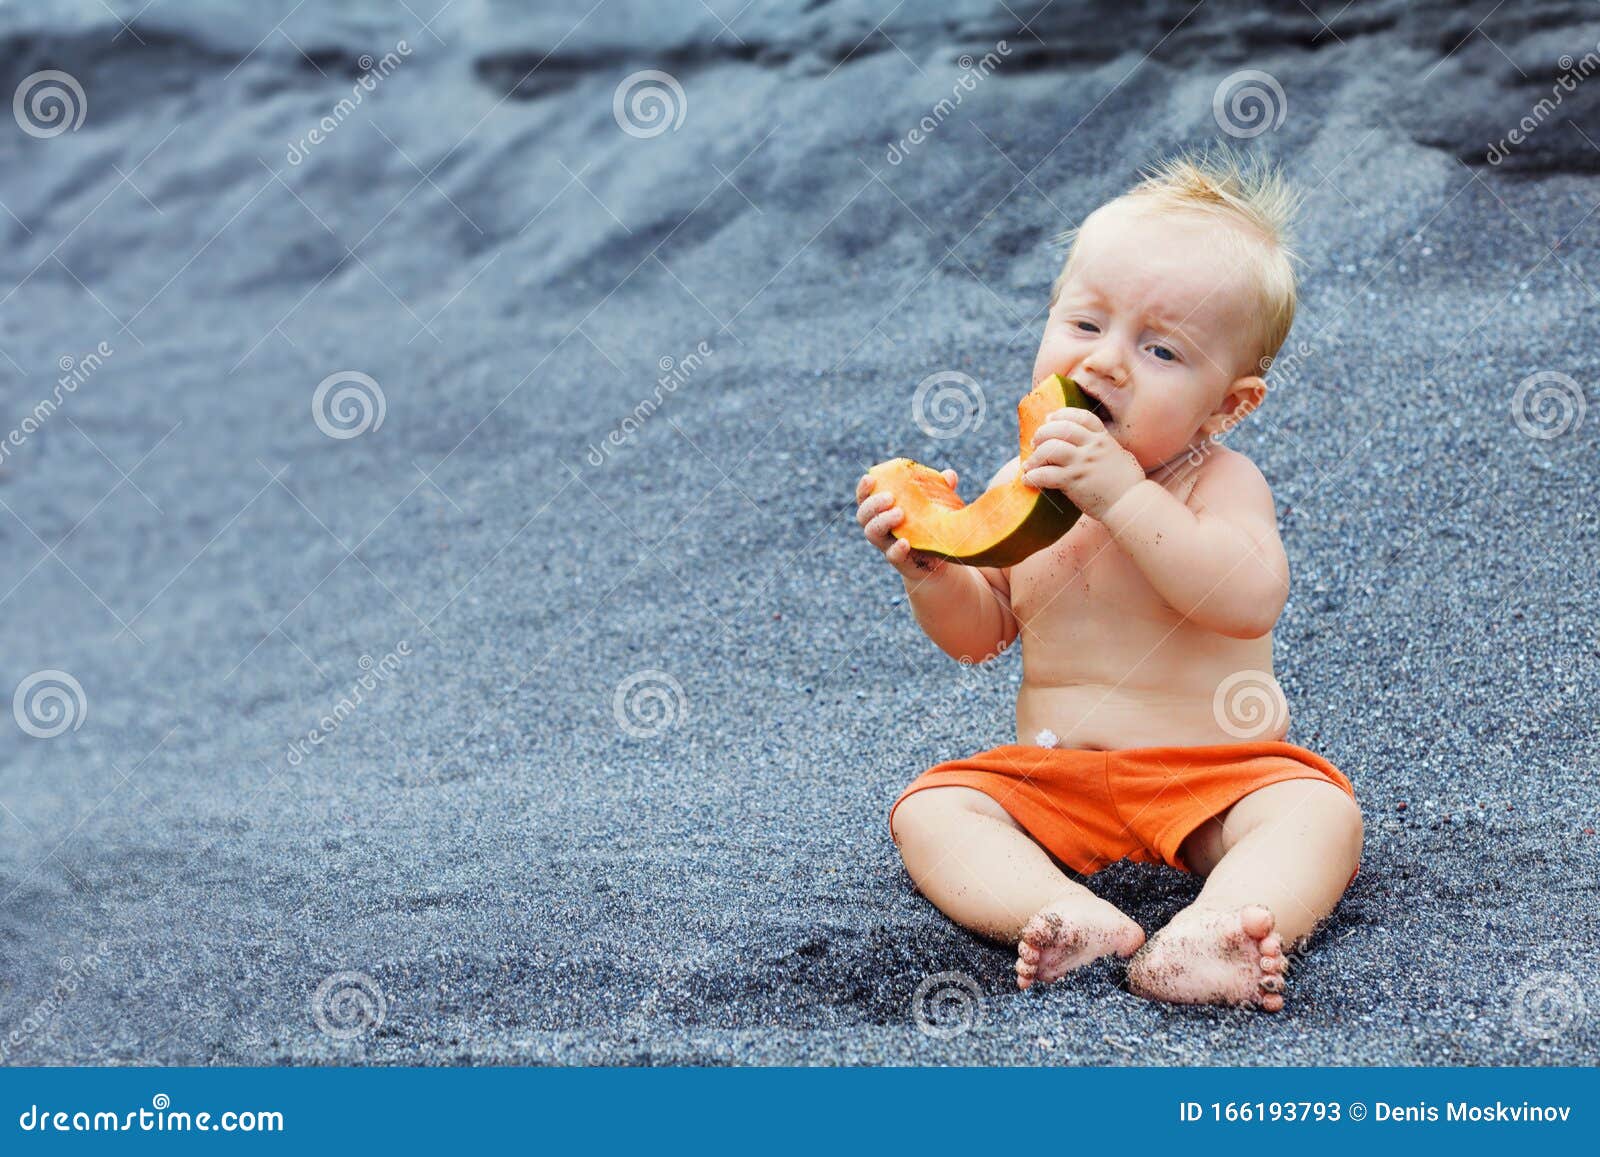 47,453 Black Baby Eating Royalty-Free Images, Stock Photos